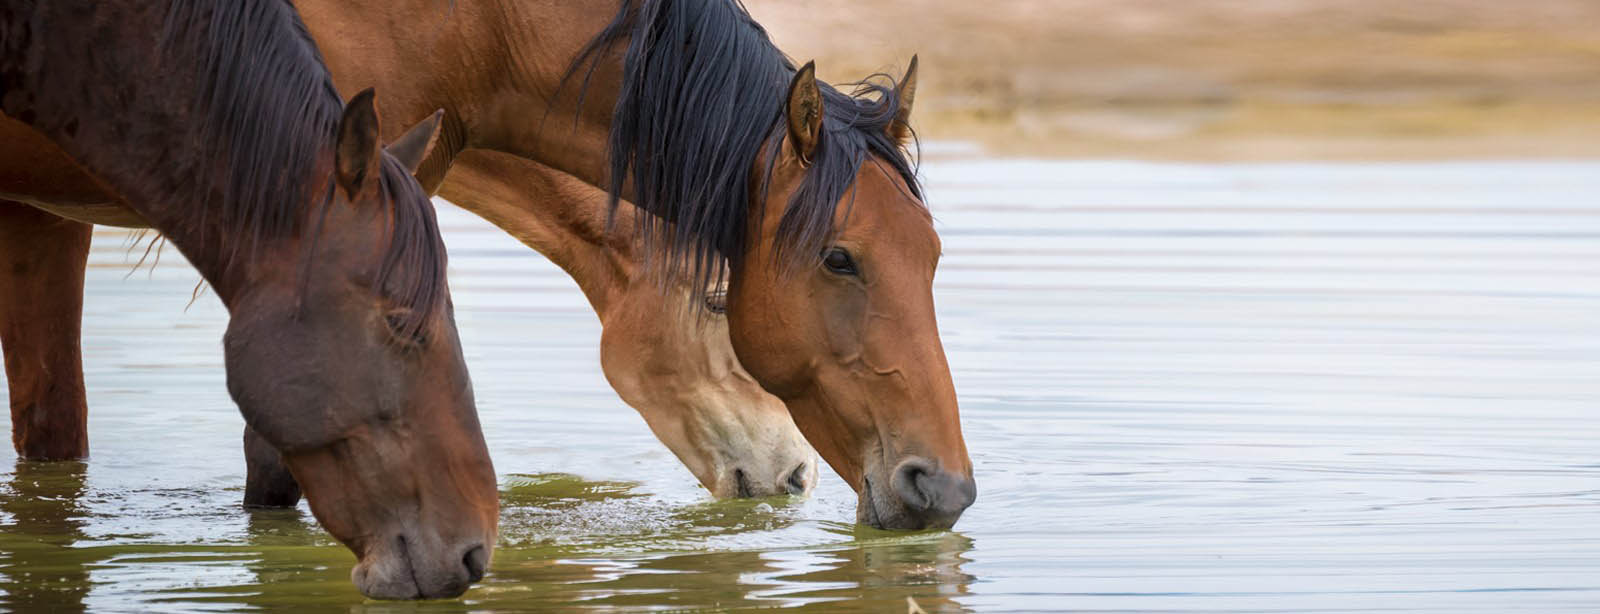 horses drinking from water